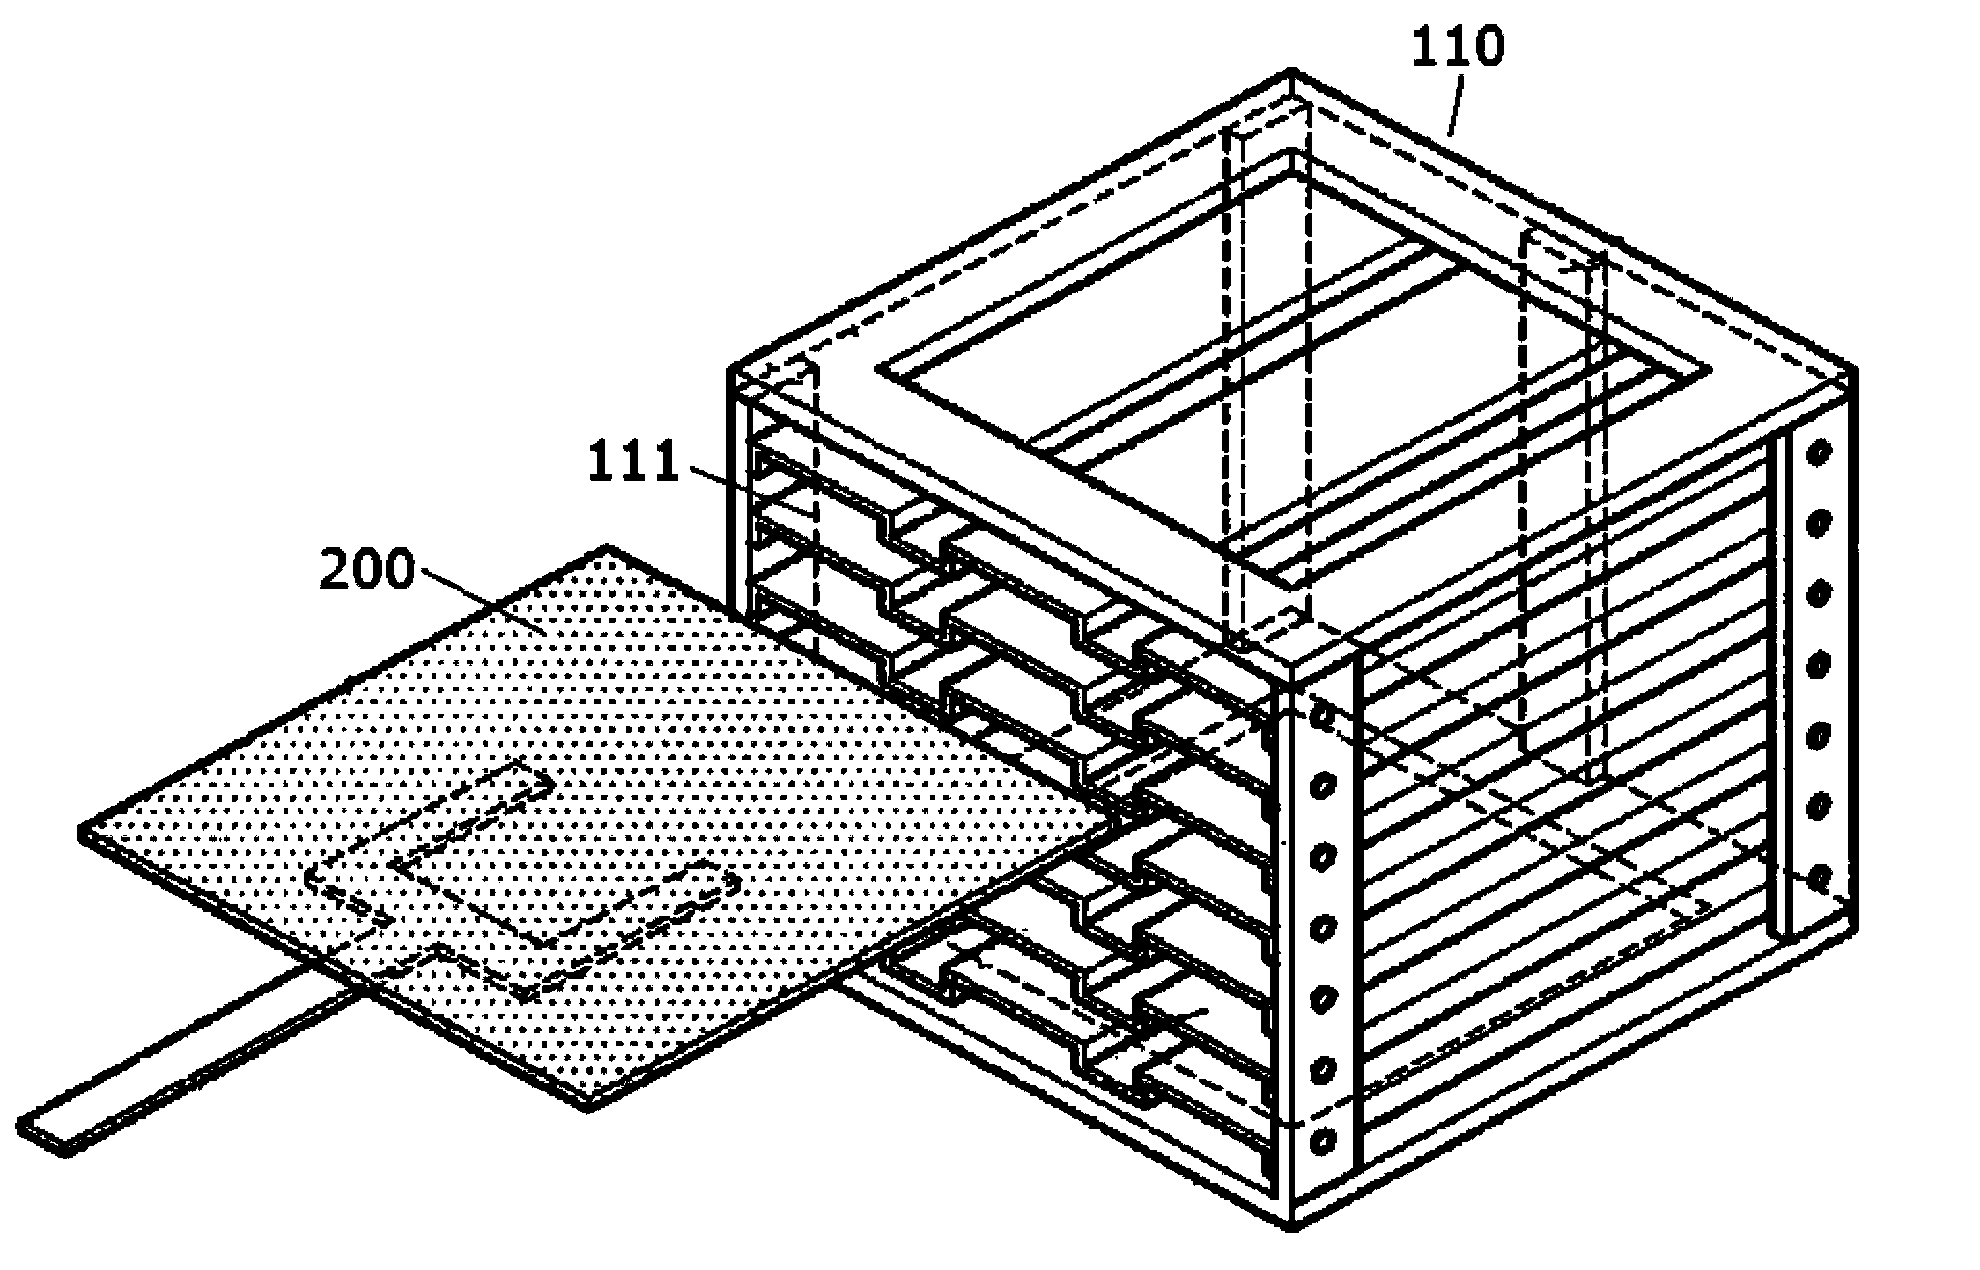 Substrate cassette device